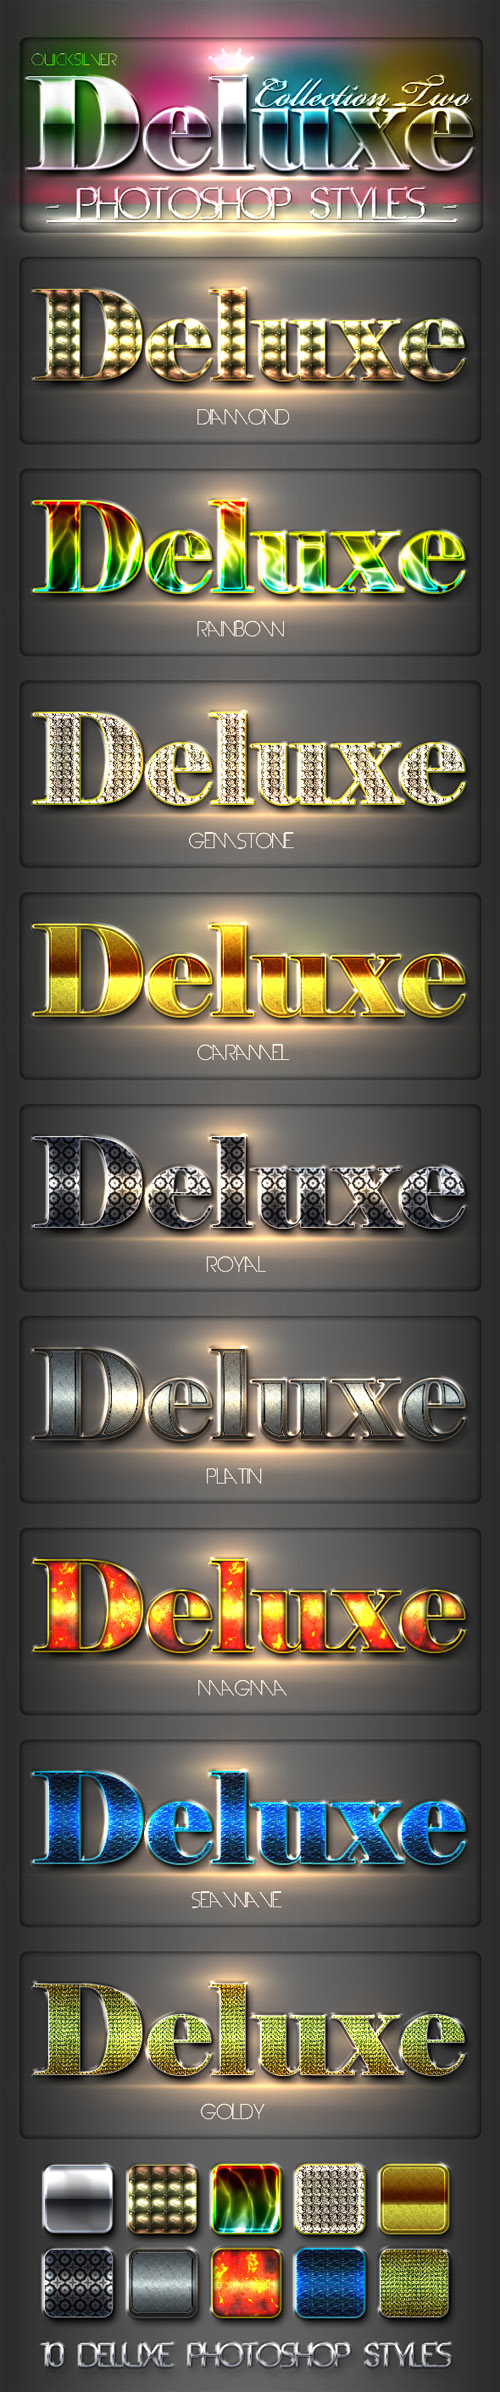 Deluxe Styles for Photoshop